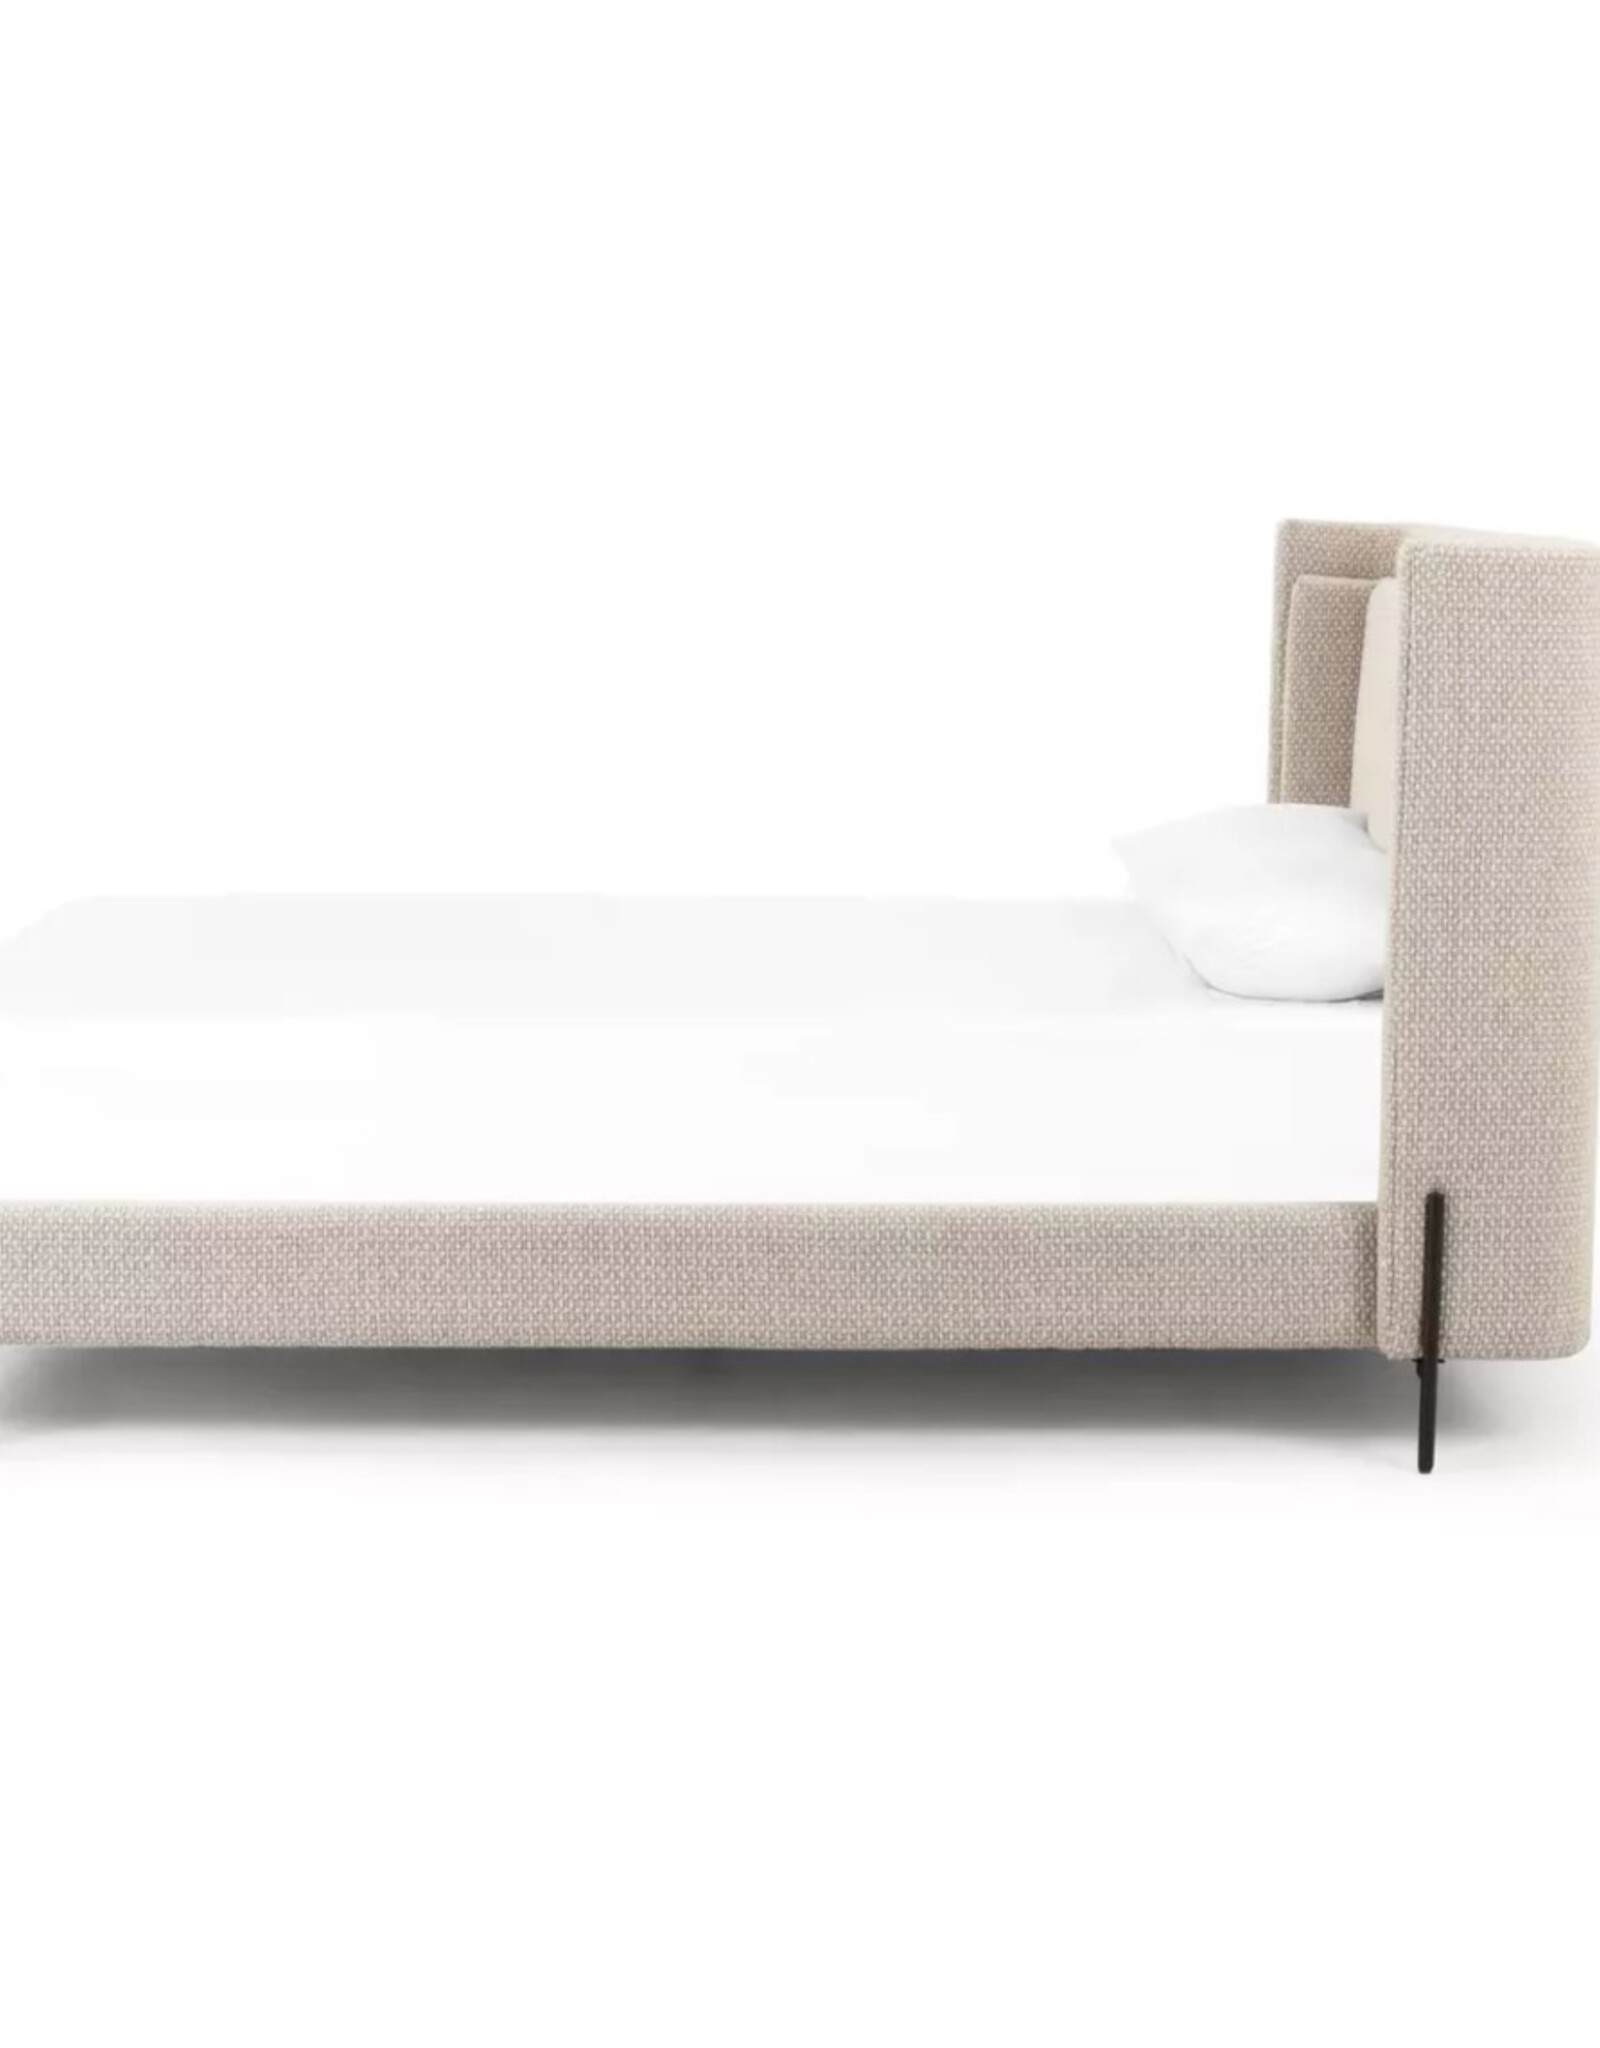 Dobson Bed in Perin Oatmeal - King